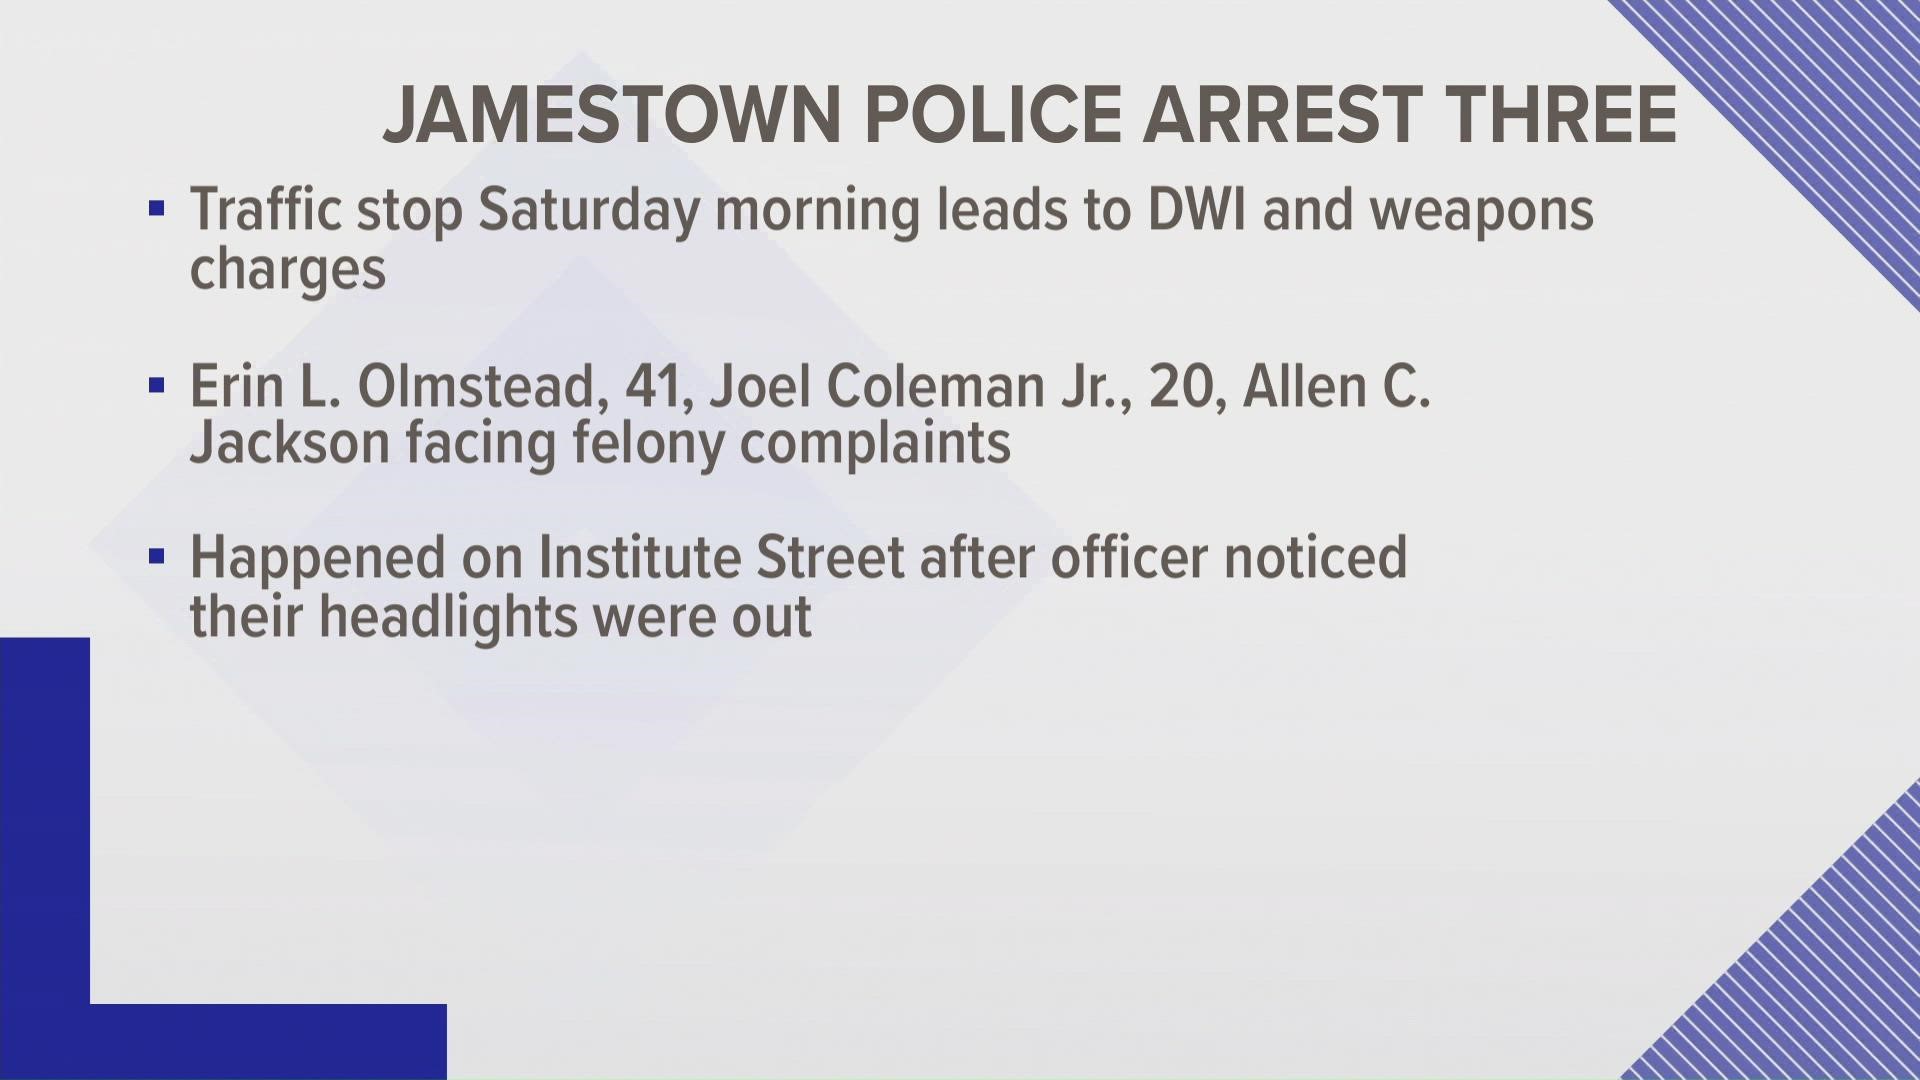 The Jamestown Police Department arrested three people after a traffic stop Saturday morning.